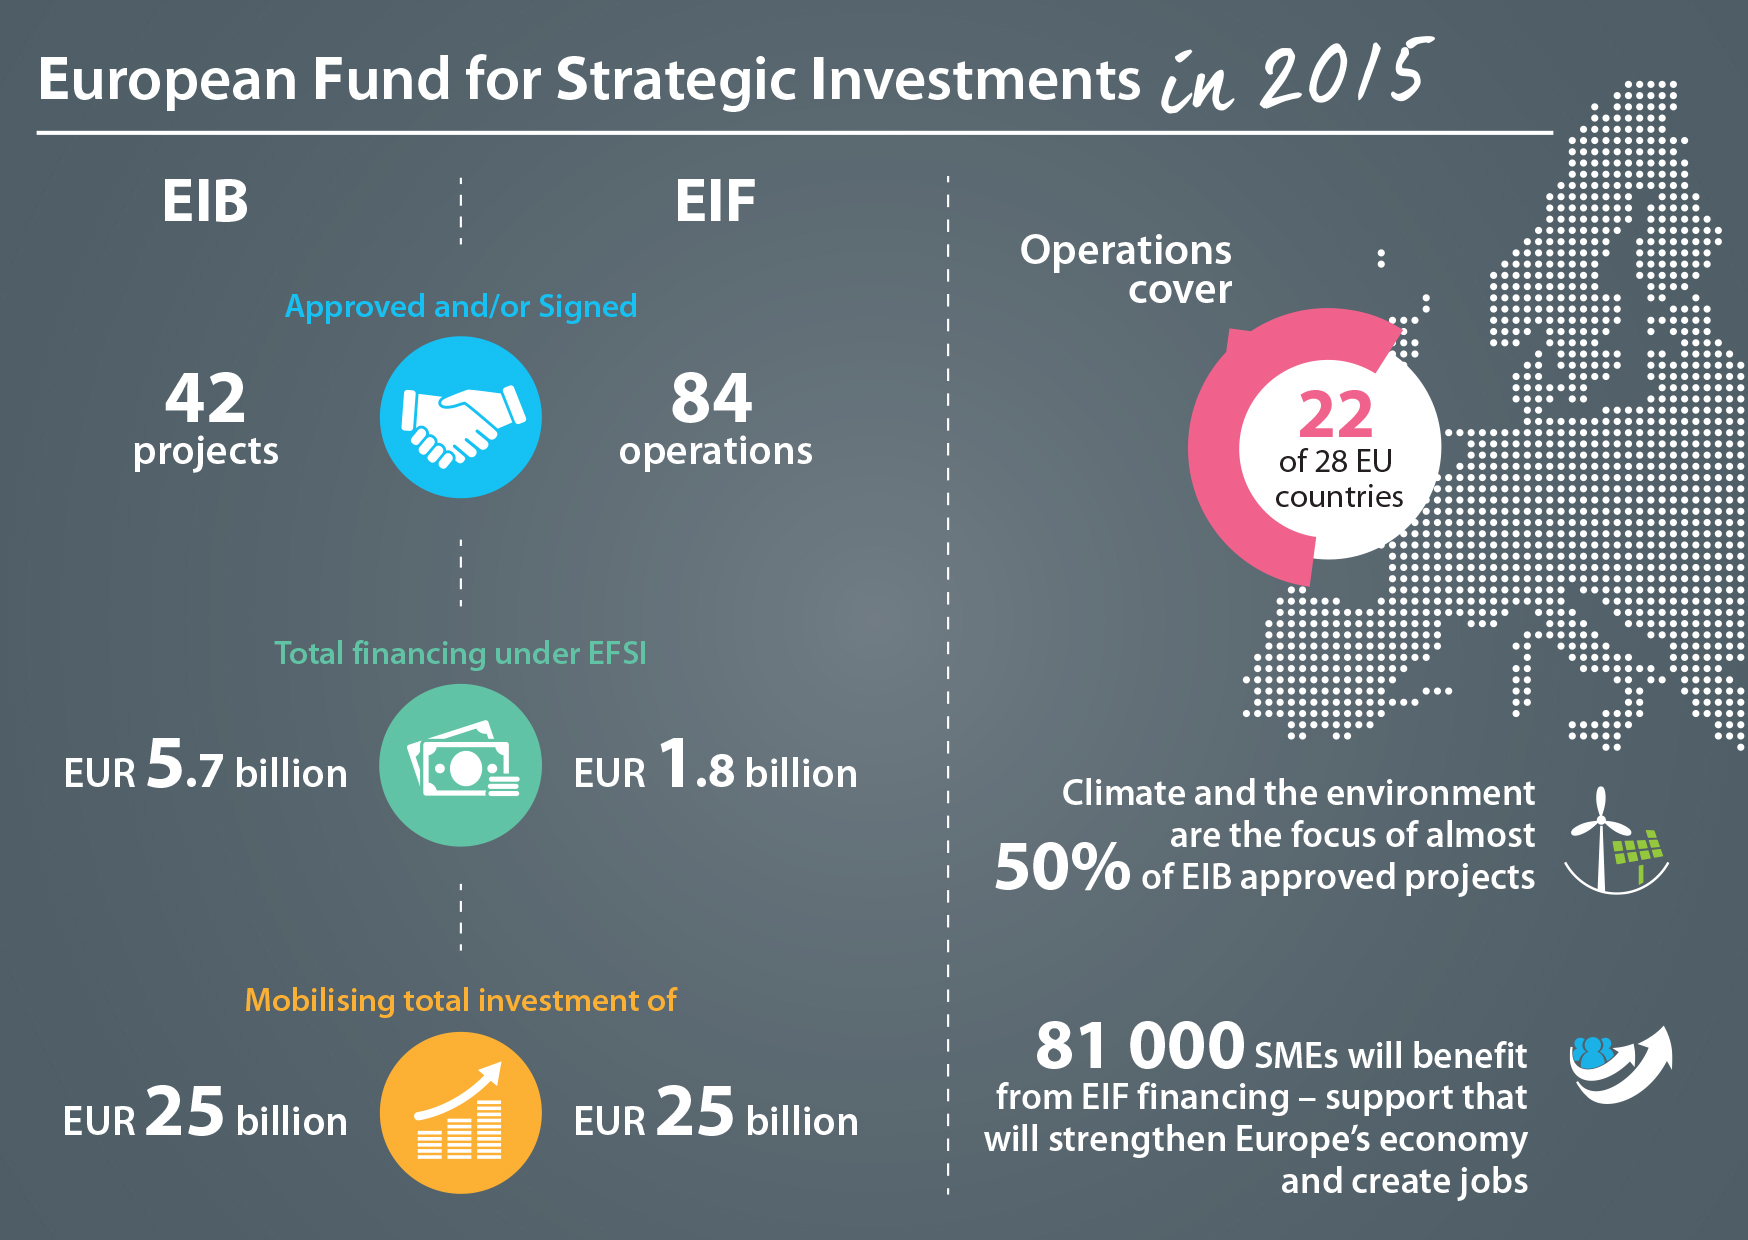 European Fund for Strategic Investments in 2015